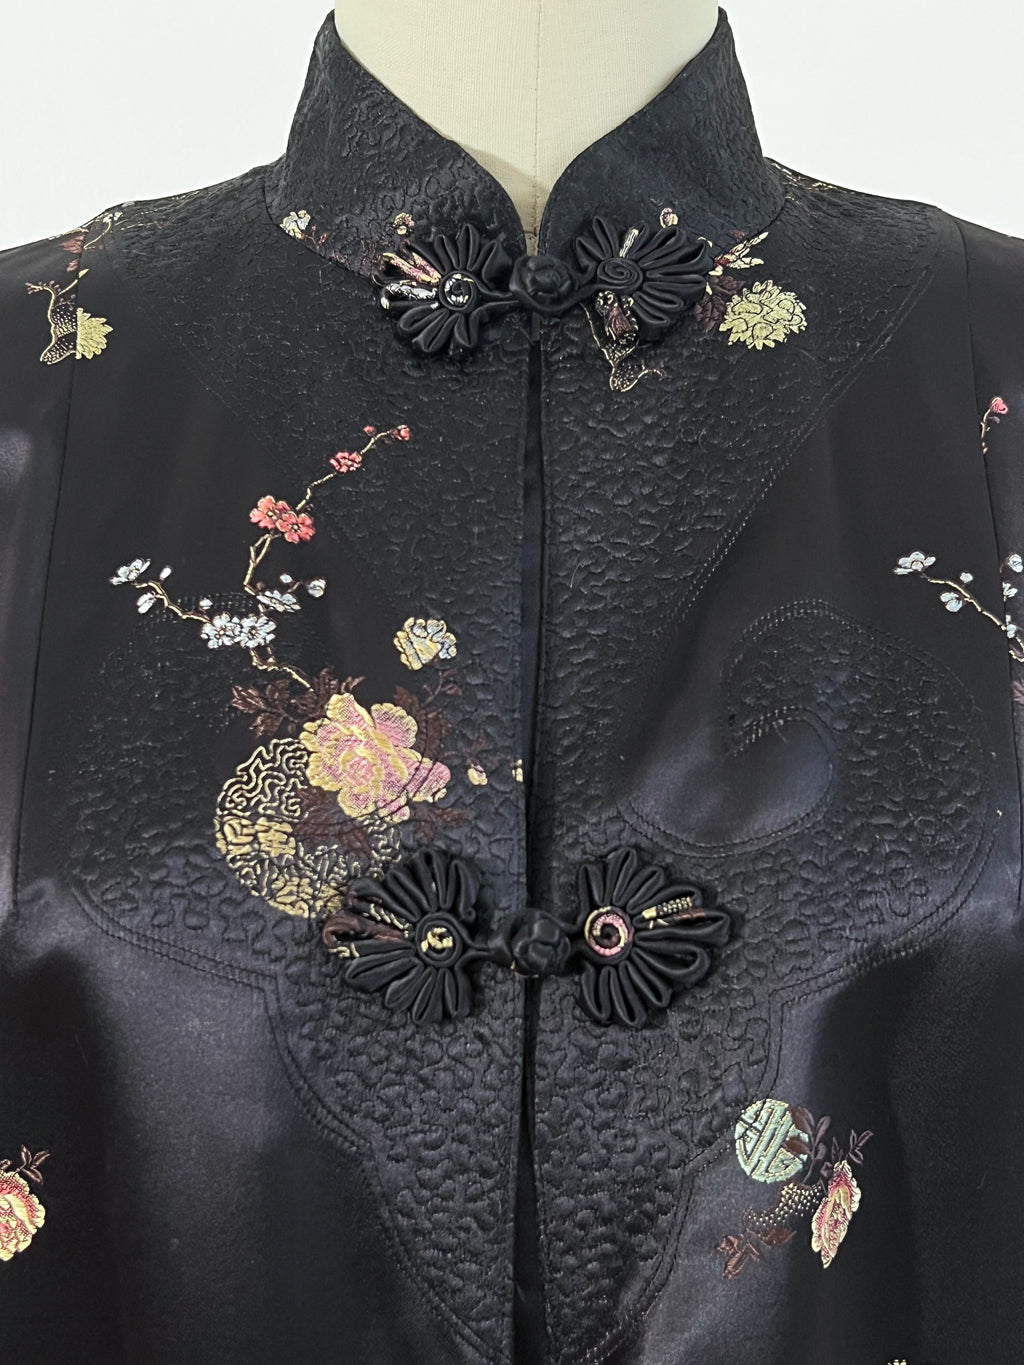 Vintage 1940s to 1950s Black Silk Satin Chinese Rose Vases Brocade Coat - Stunning Loungewear or Evening Coat w Soft Pastels Size M